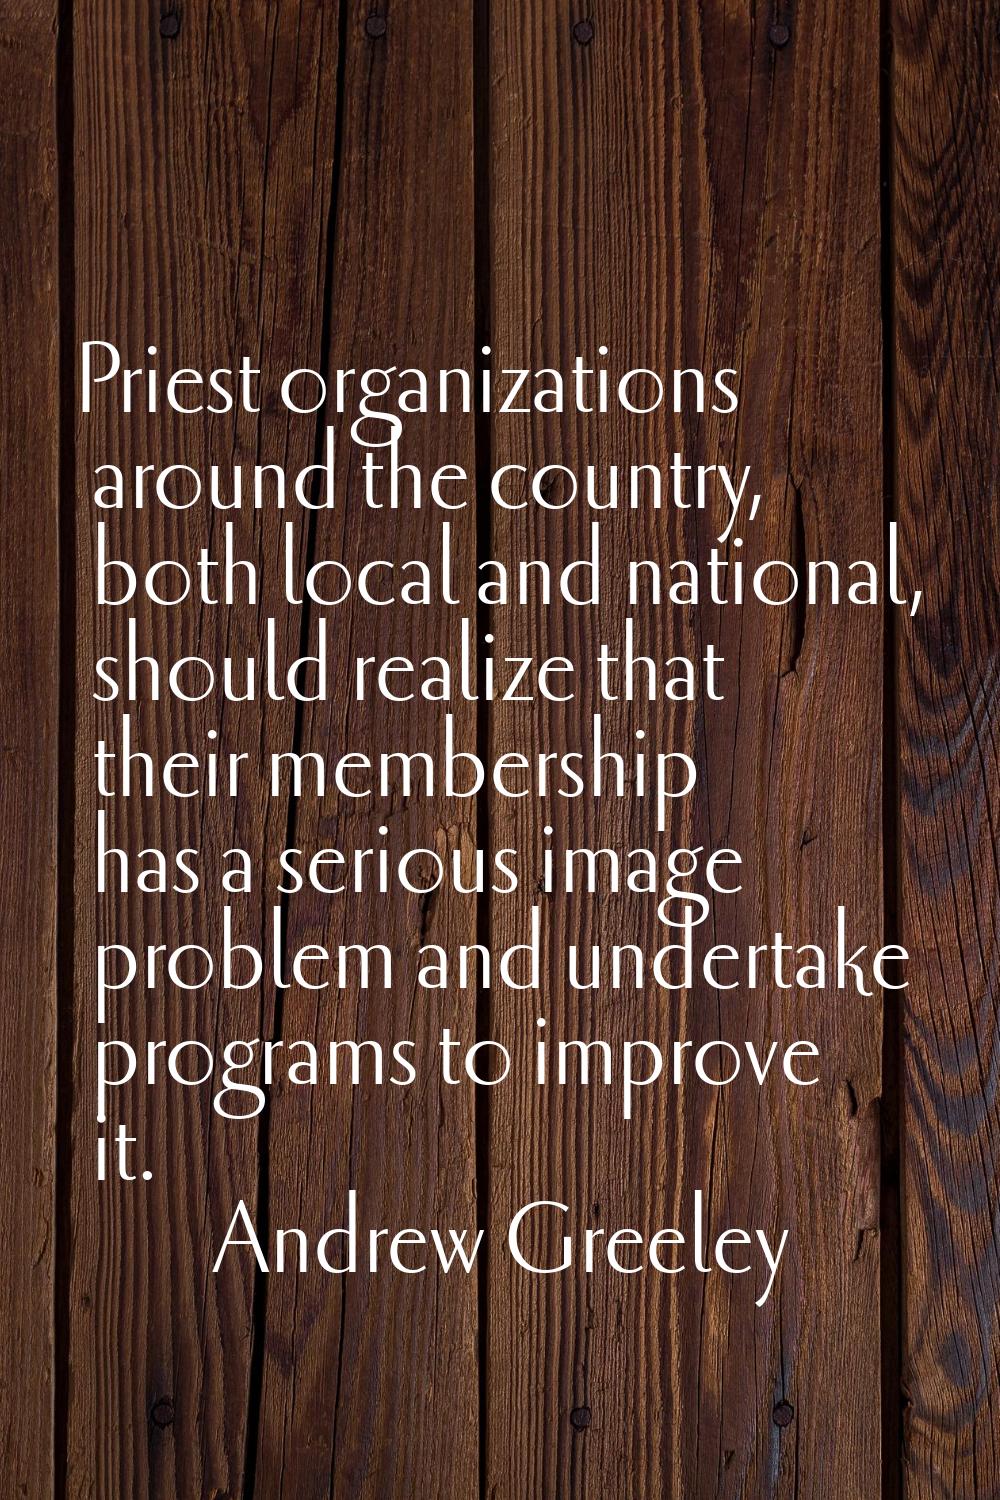 Priest organizations around the country, both local and national, should realize that their members